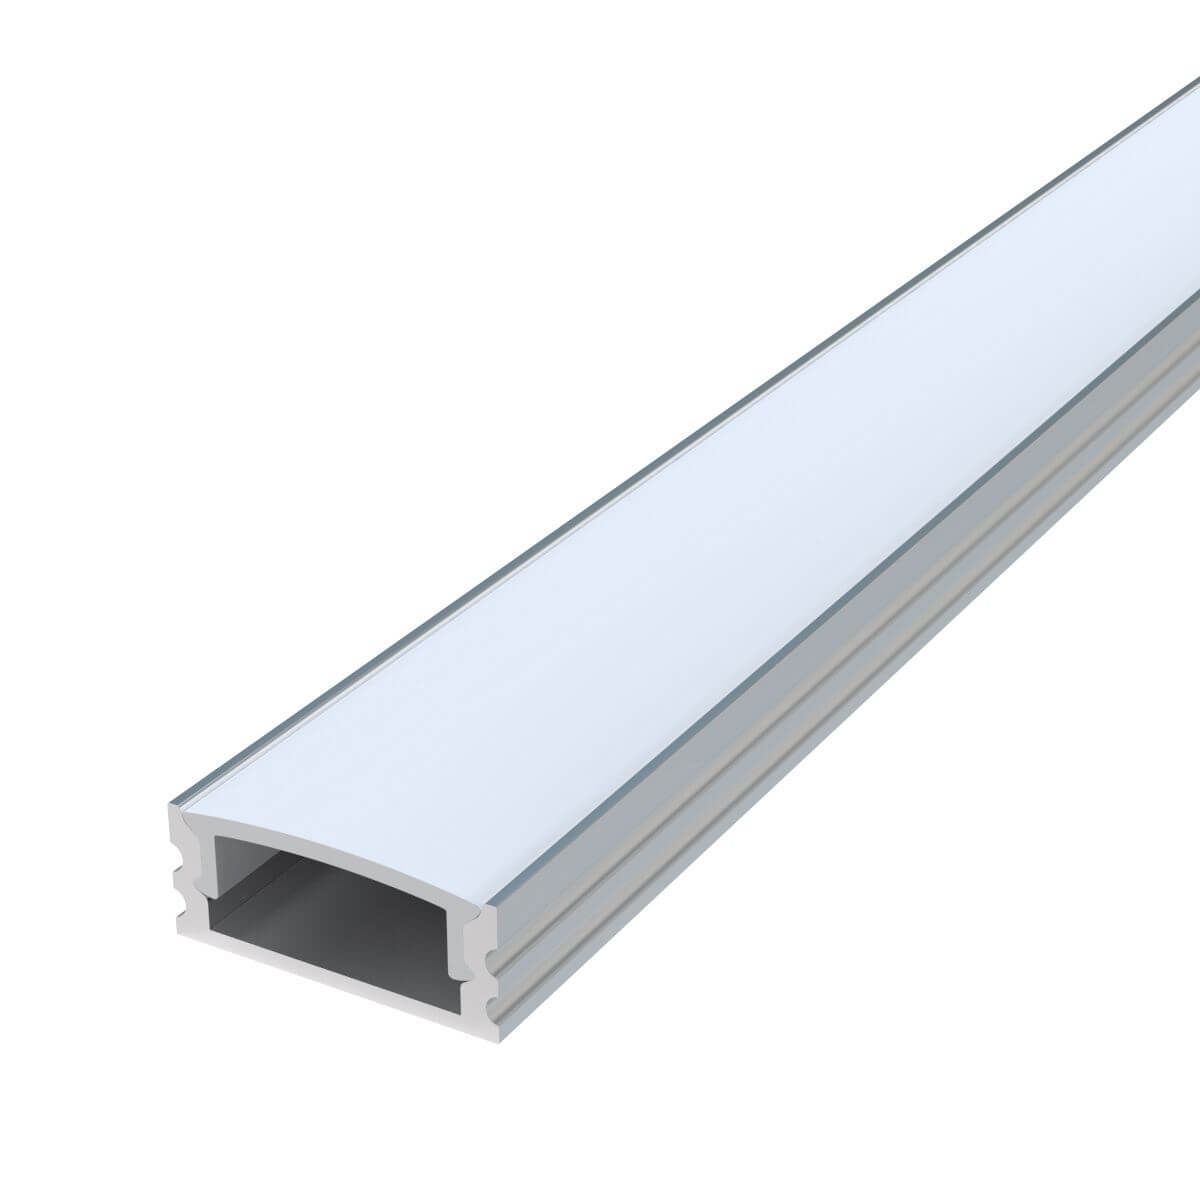 View Surface Mounted LED Strip Profile LED Supplier information